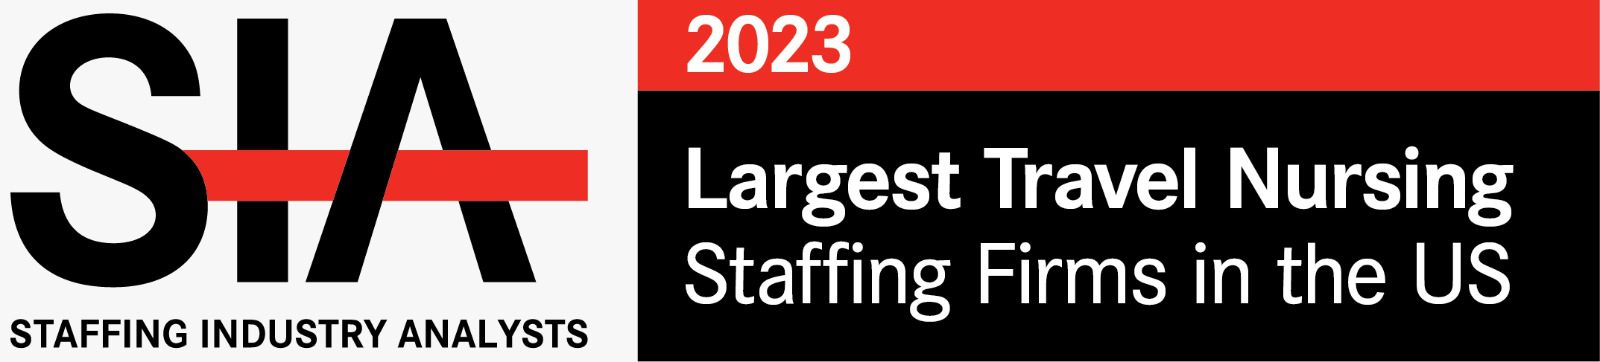 SIA’s Largest Travel Nursing Staffing Firms in the US 2023